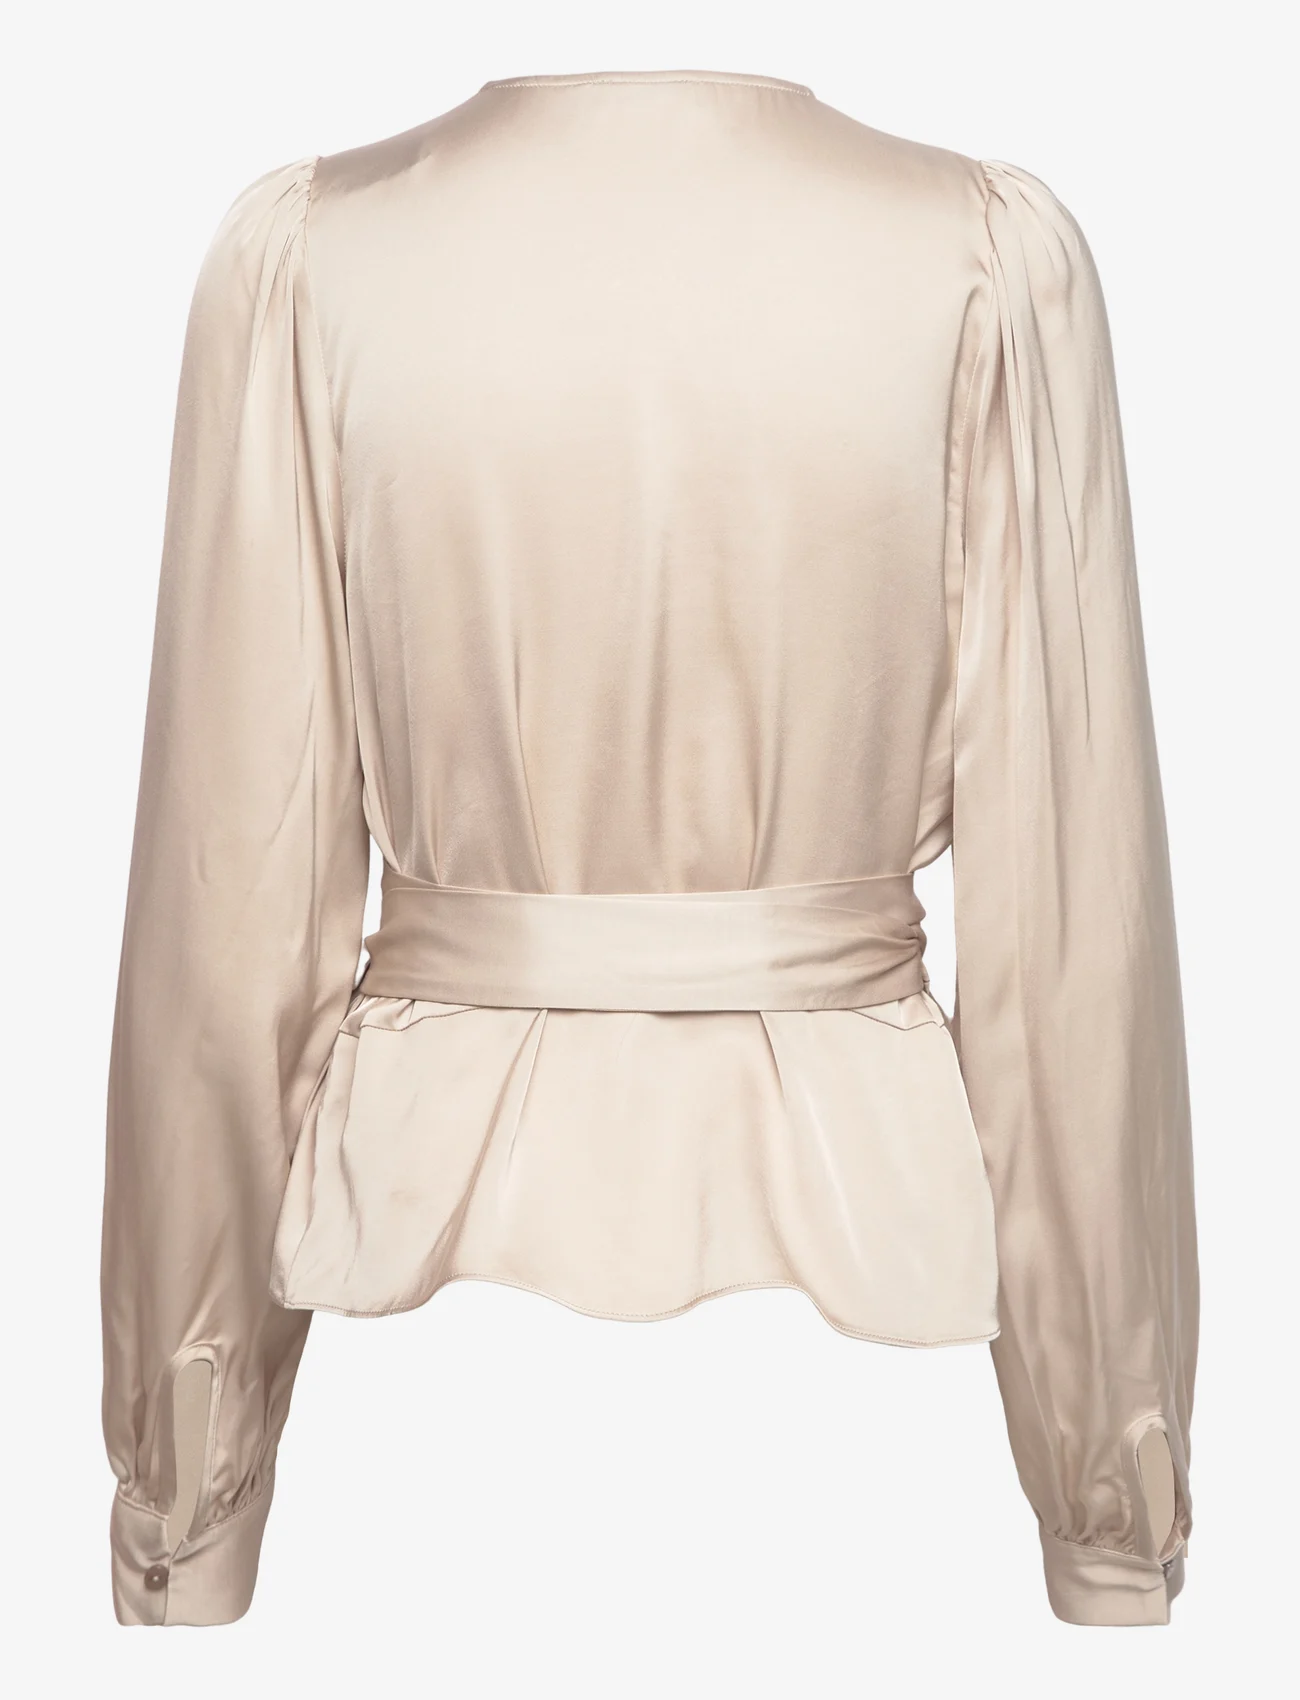 2NDDAY - 2ND Harlow - Fluid Satin - long-sleeved blouses - silver lining - 1